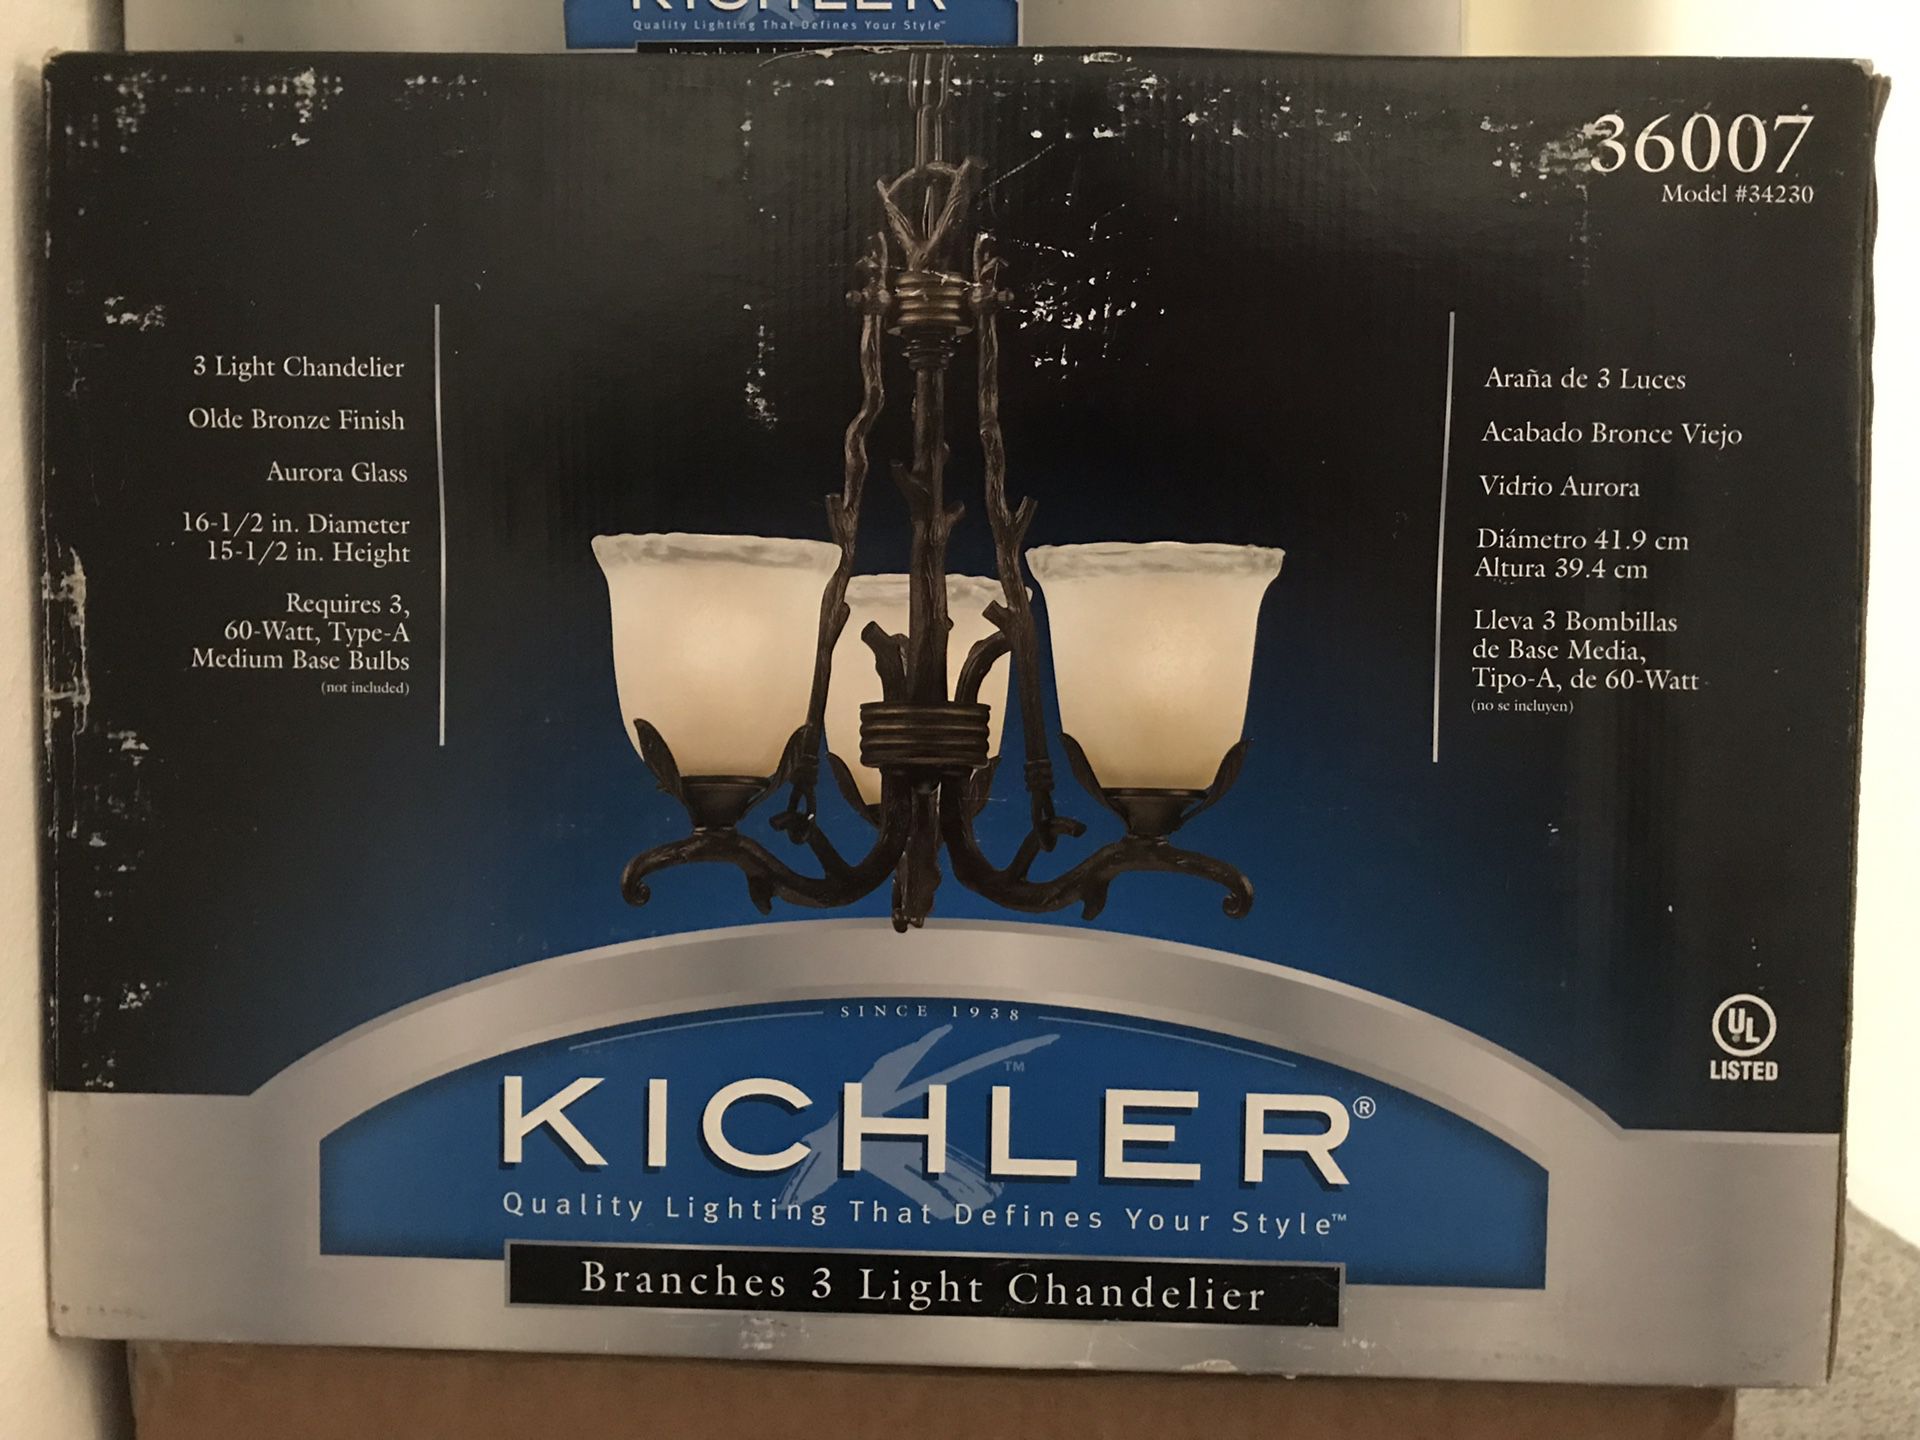 New- Never opened chandelier and 2 wall sconces-in box